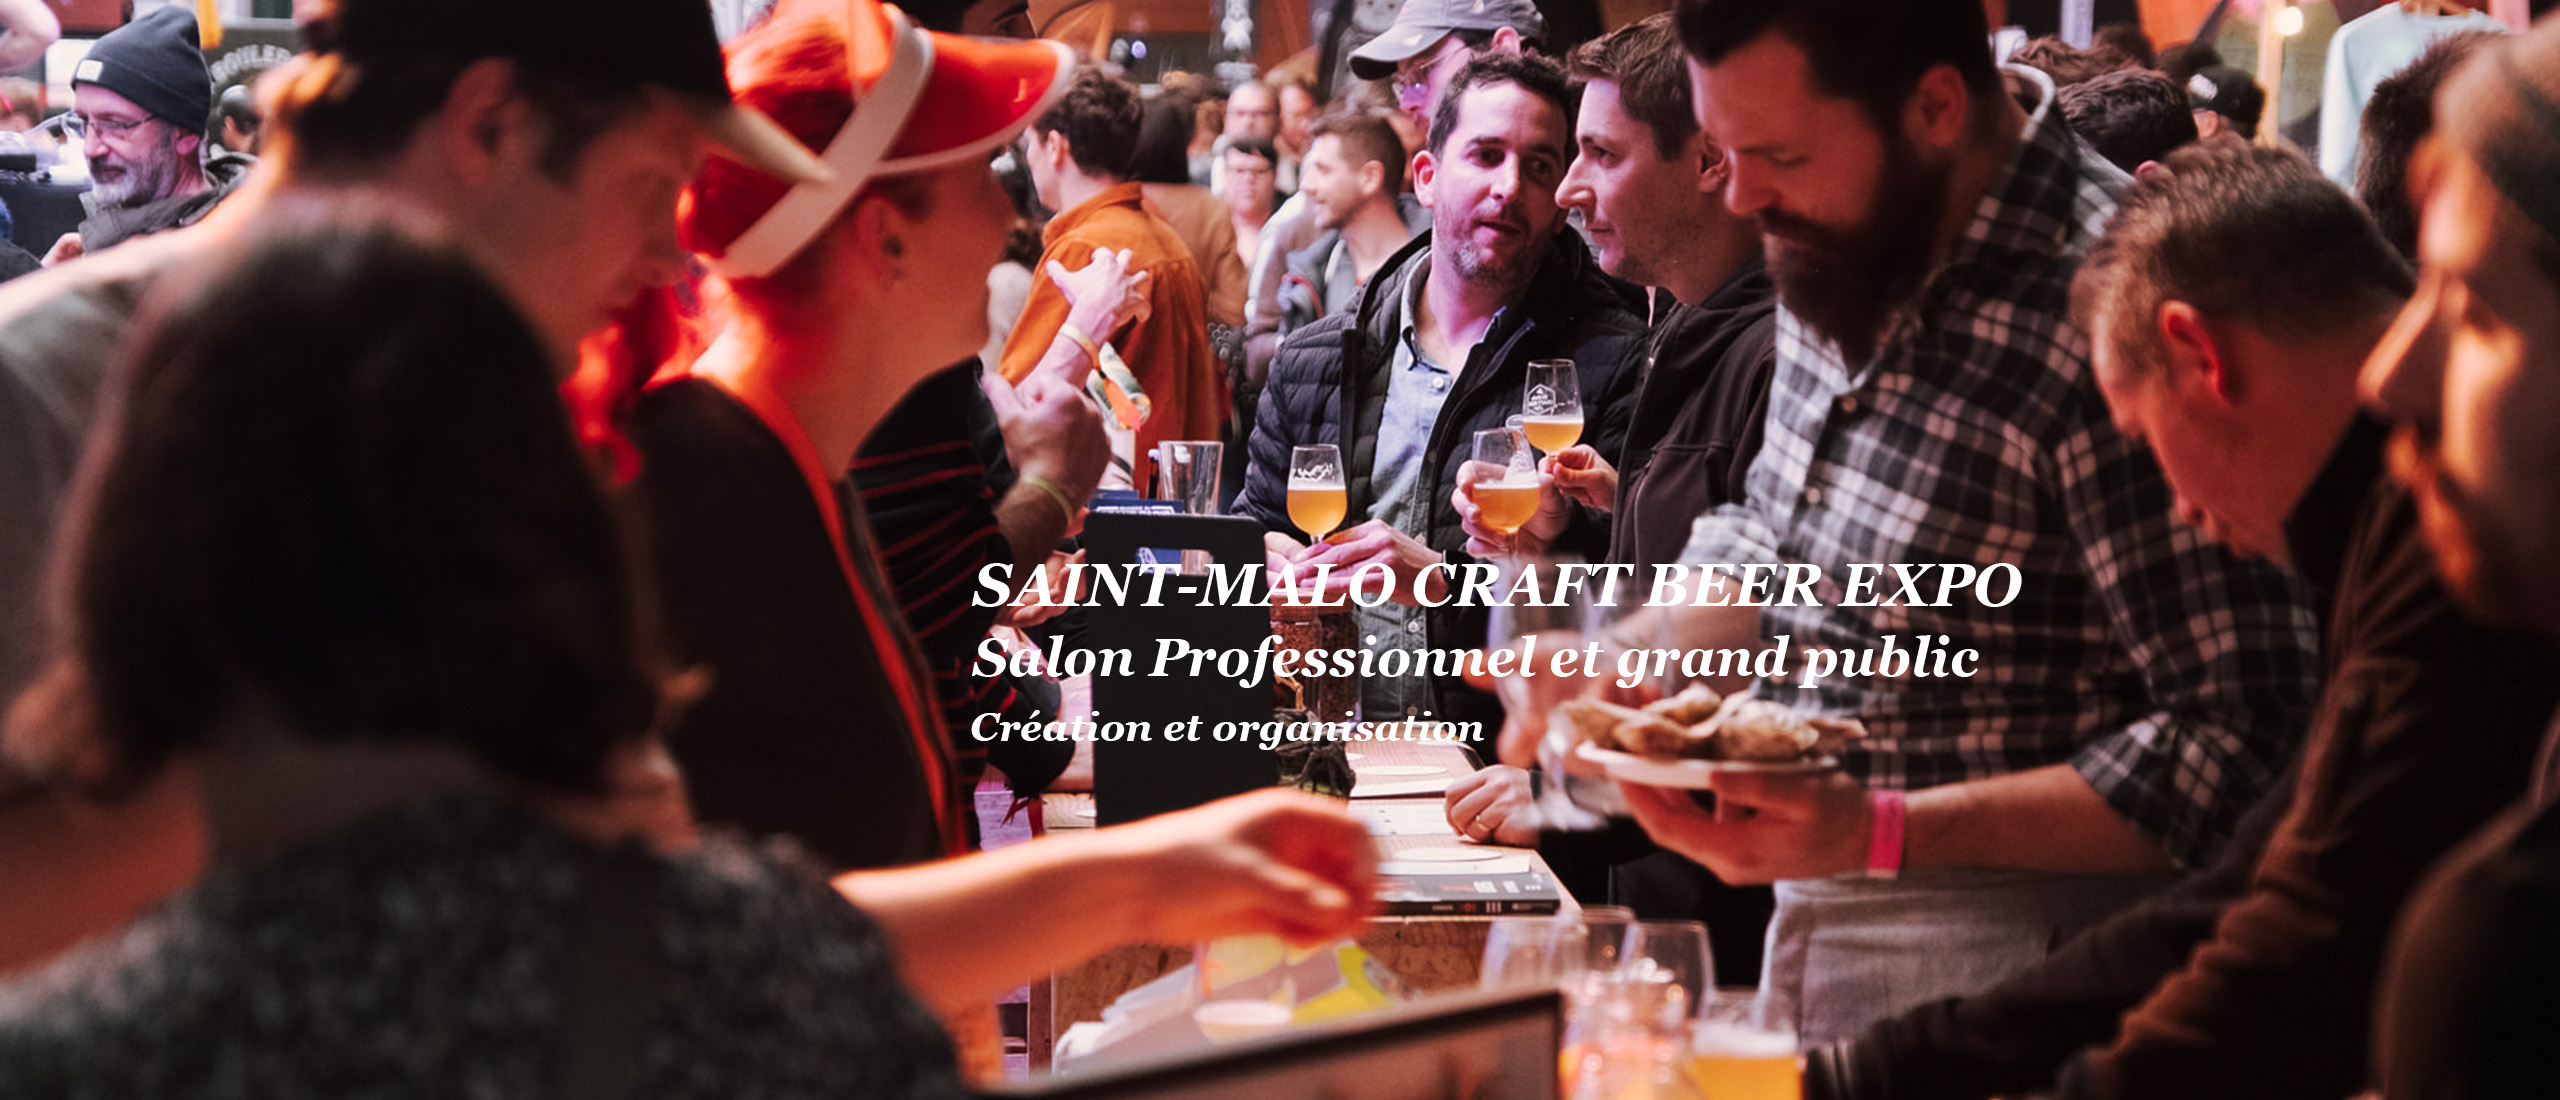 Festival Saint-Malo Craft Beer Expo